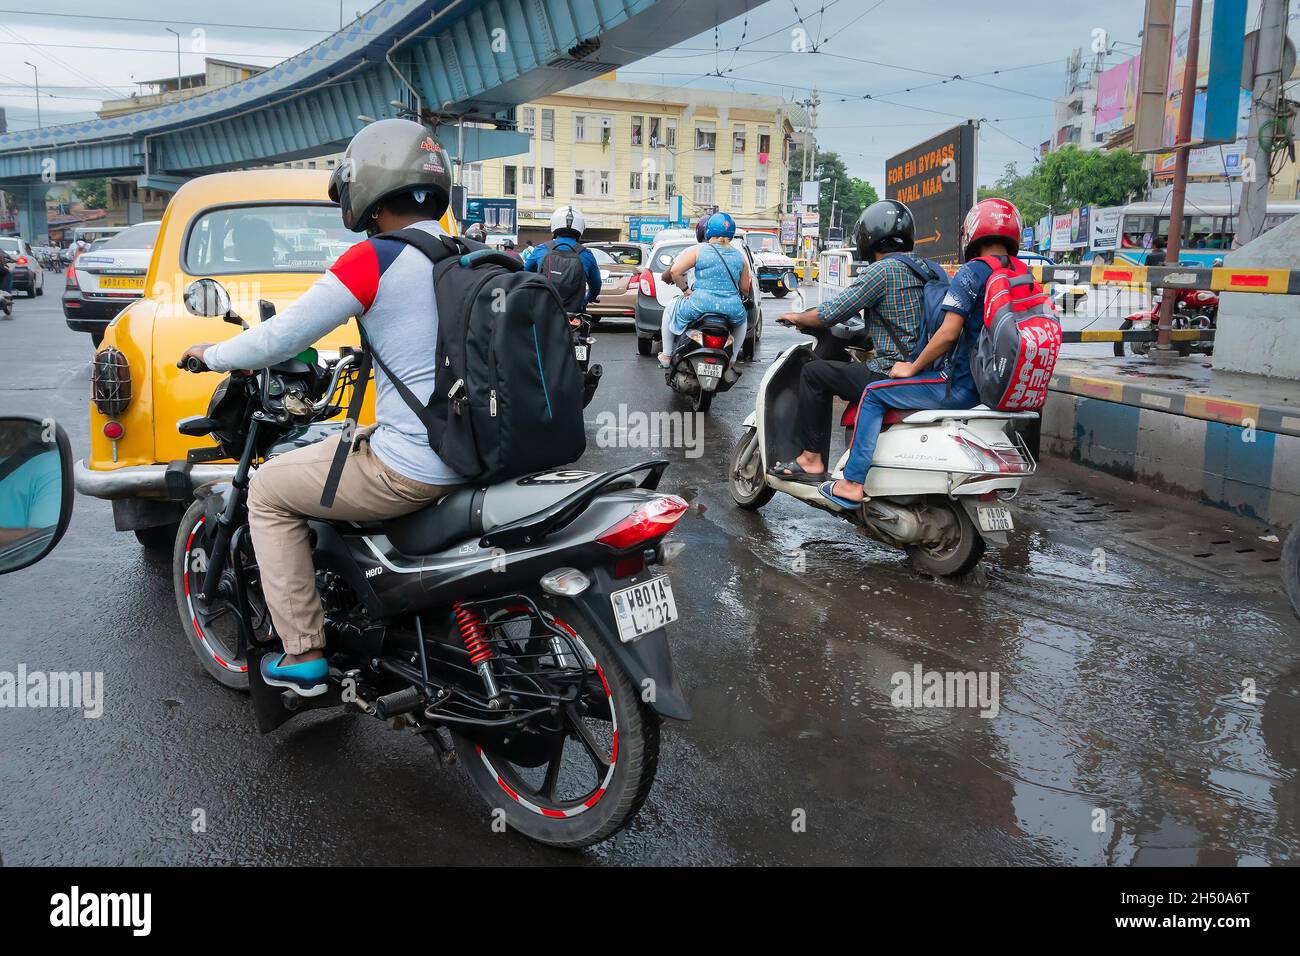 Kolkata, West Bengal, India - 6th August 2019 : Yellow cab, motorbike and scooters, passing below AJC Bose road flyover, busy city traffic of Kolkata Stock Photo